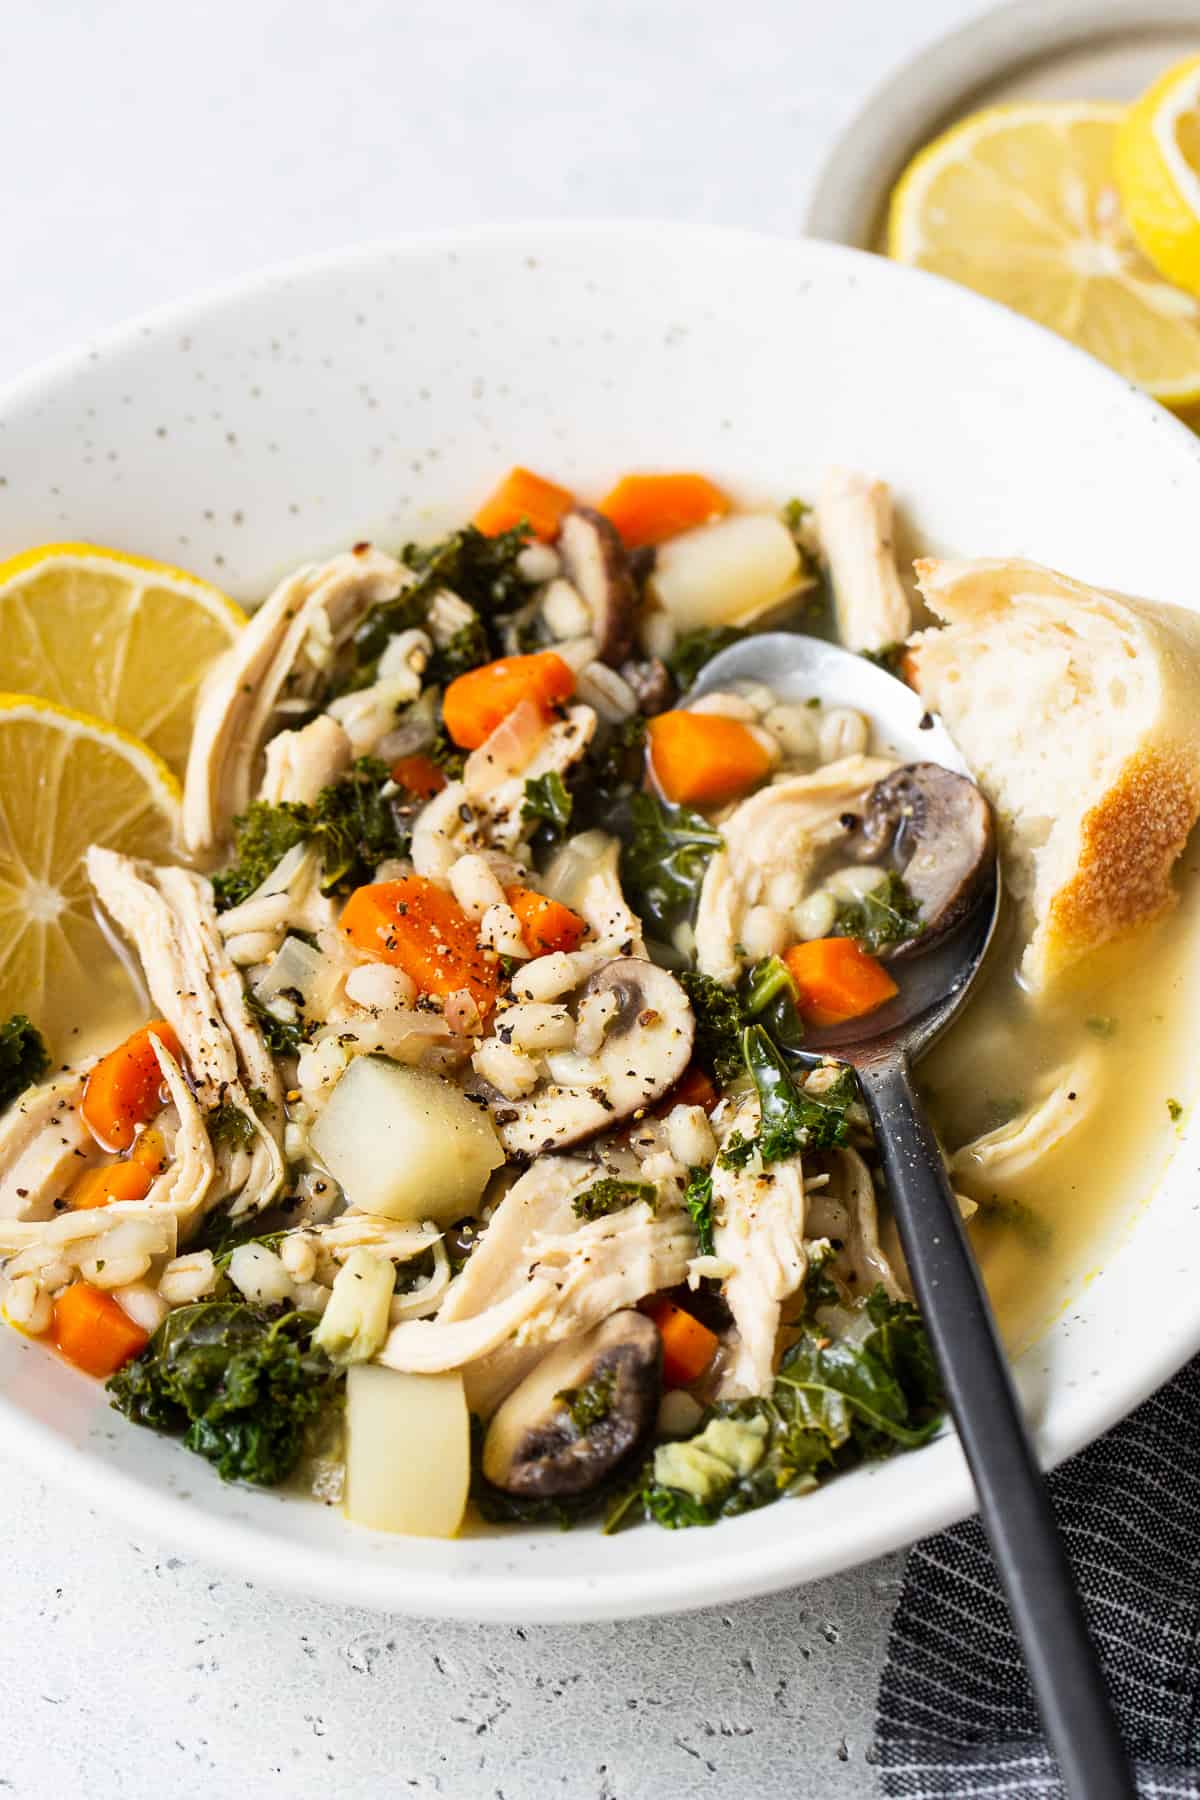 https://fitfoodiefinds.com/wp-content/uploads/2022/11/Ultimate-Chicken-Soup-1.jpg